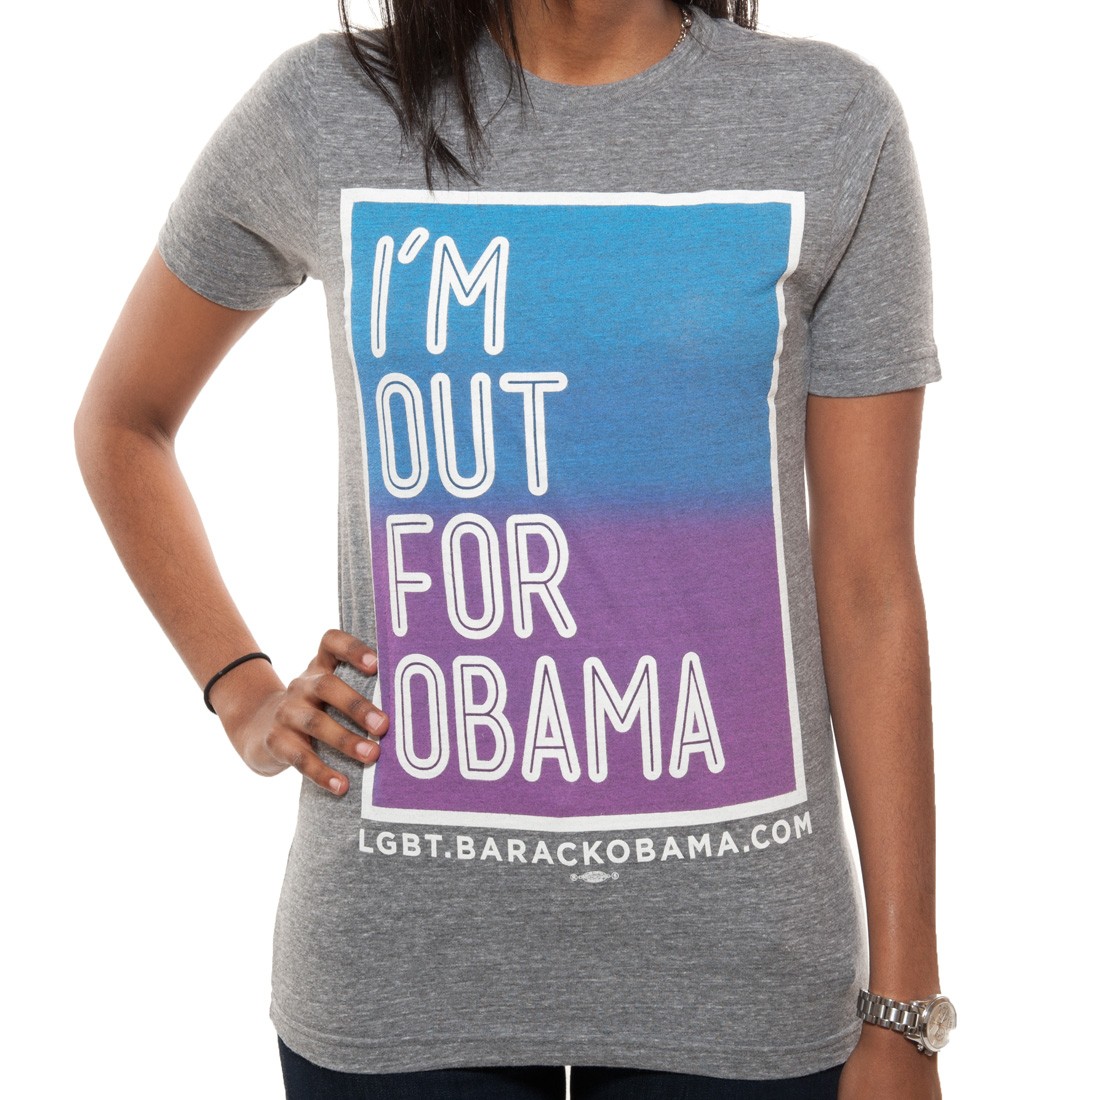 ‘Out for Obama’ and Other Outlandish Campaign Slogans